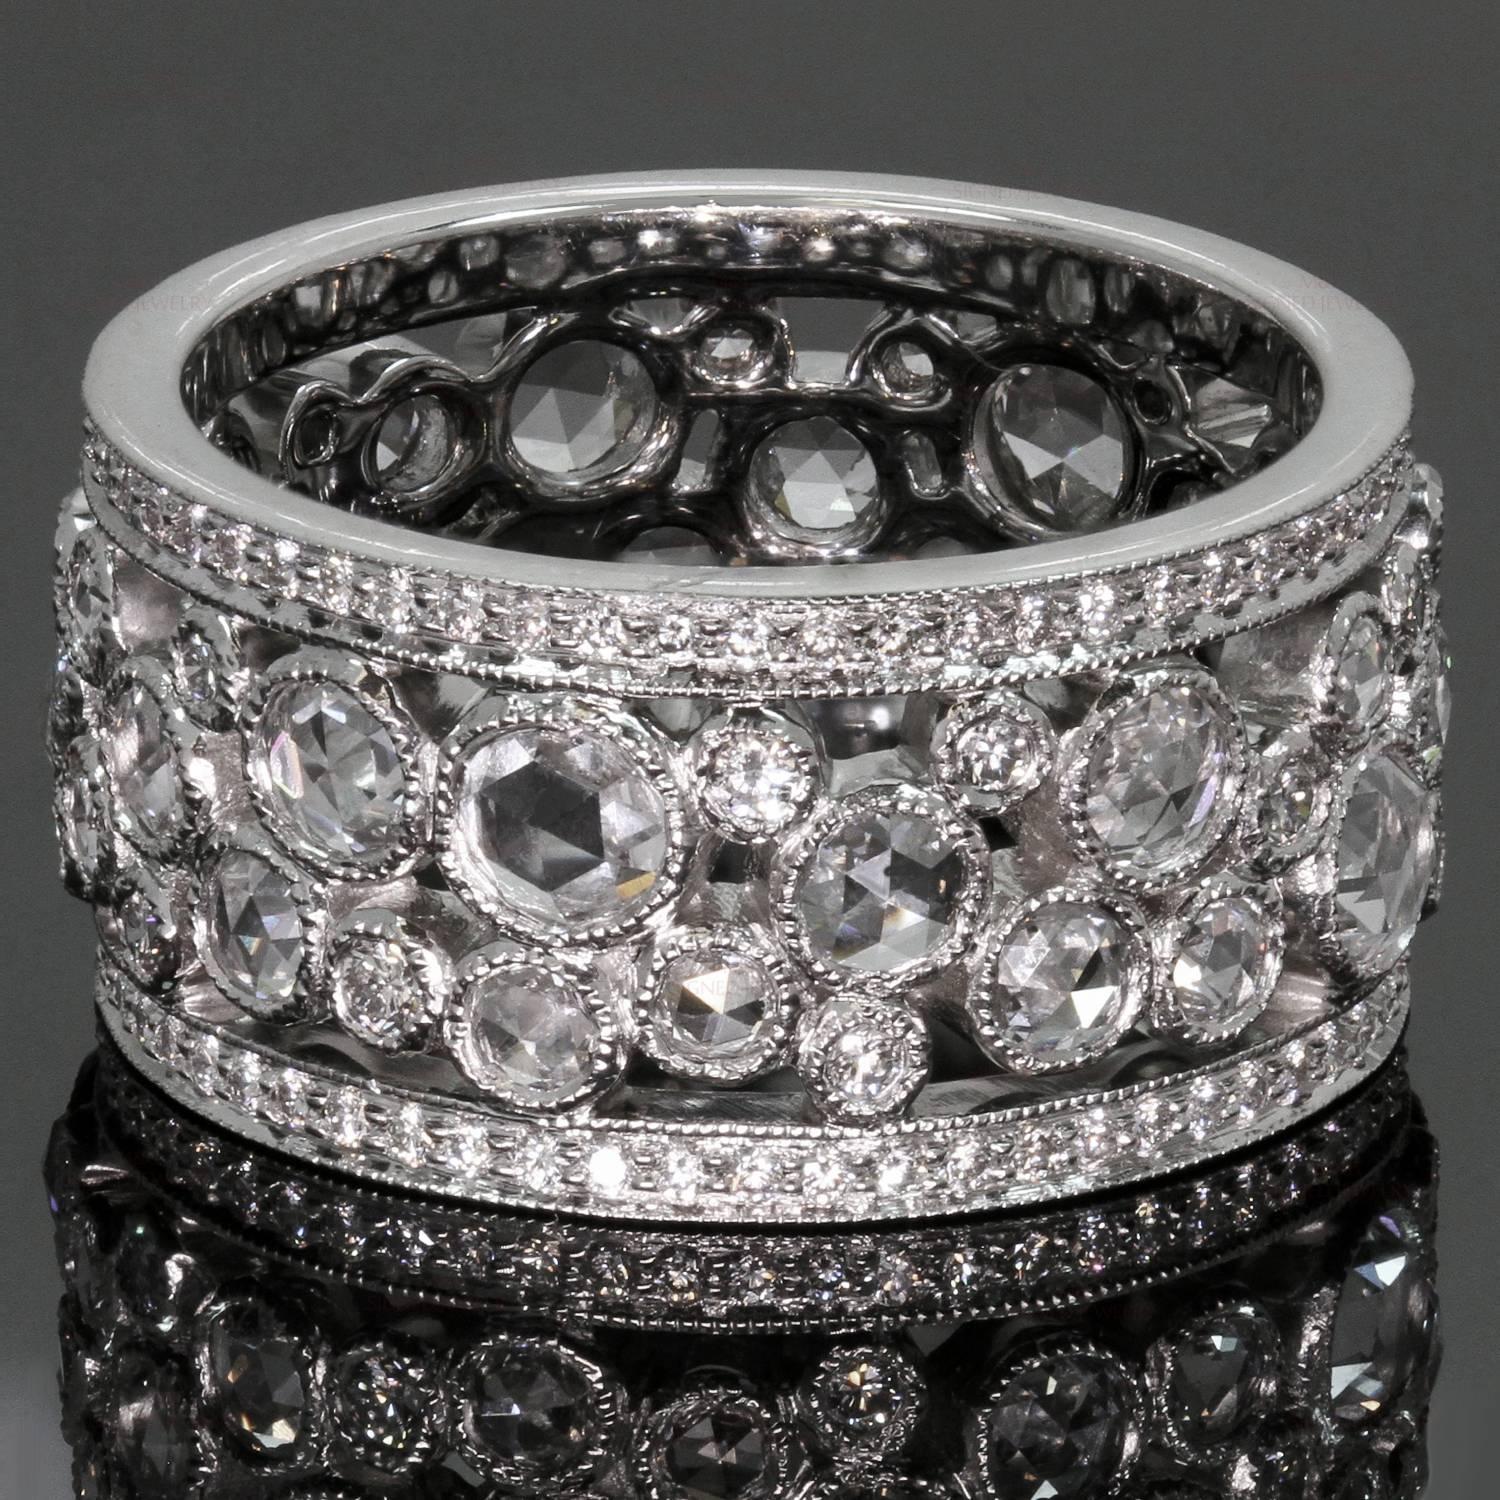 This stunning Tiffany band from the Cobblestone collection is crafted in platinum and beautifully set with exquisite rose-cut diamonds of an estimated 1.62 carats and round brilliant-cut diamonds of an estimated 0.52 carats. Made in United States